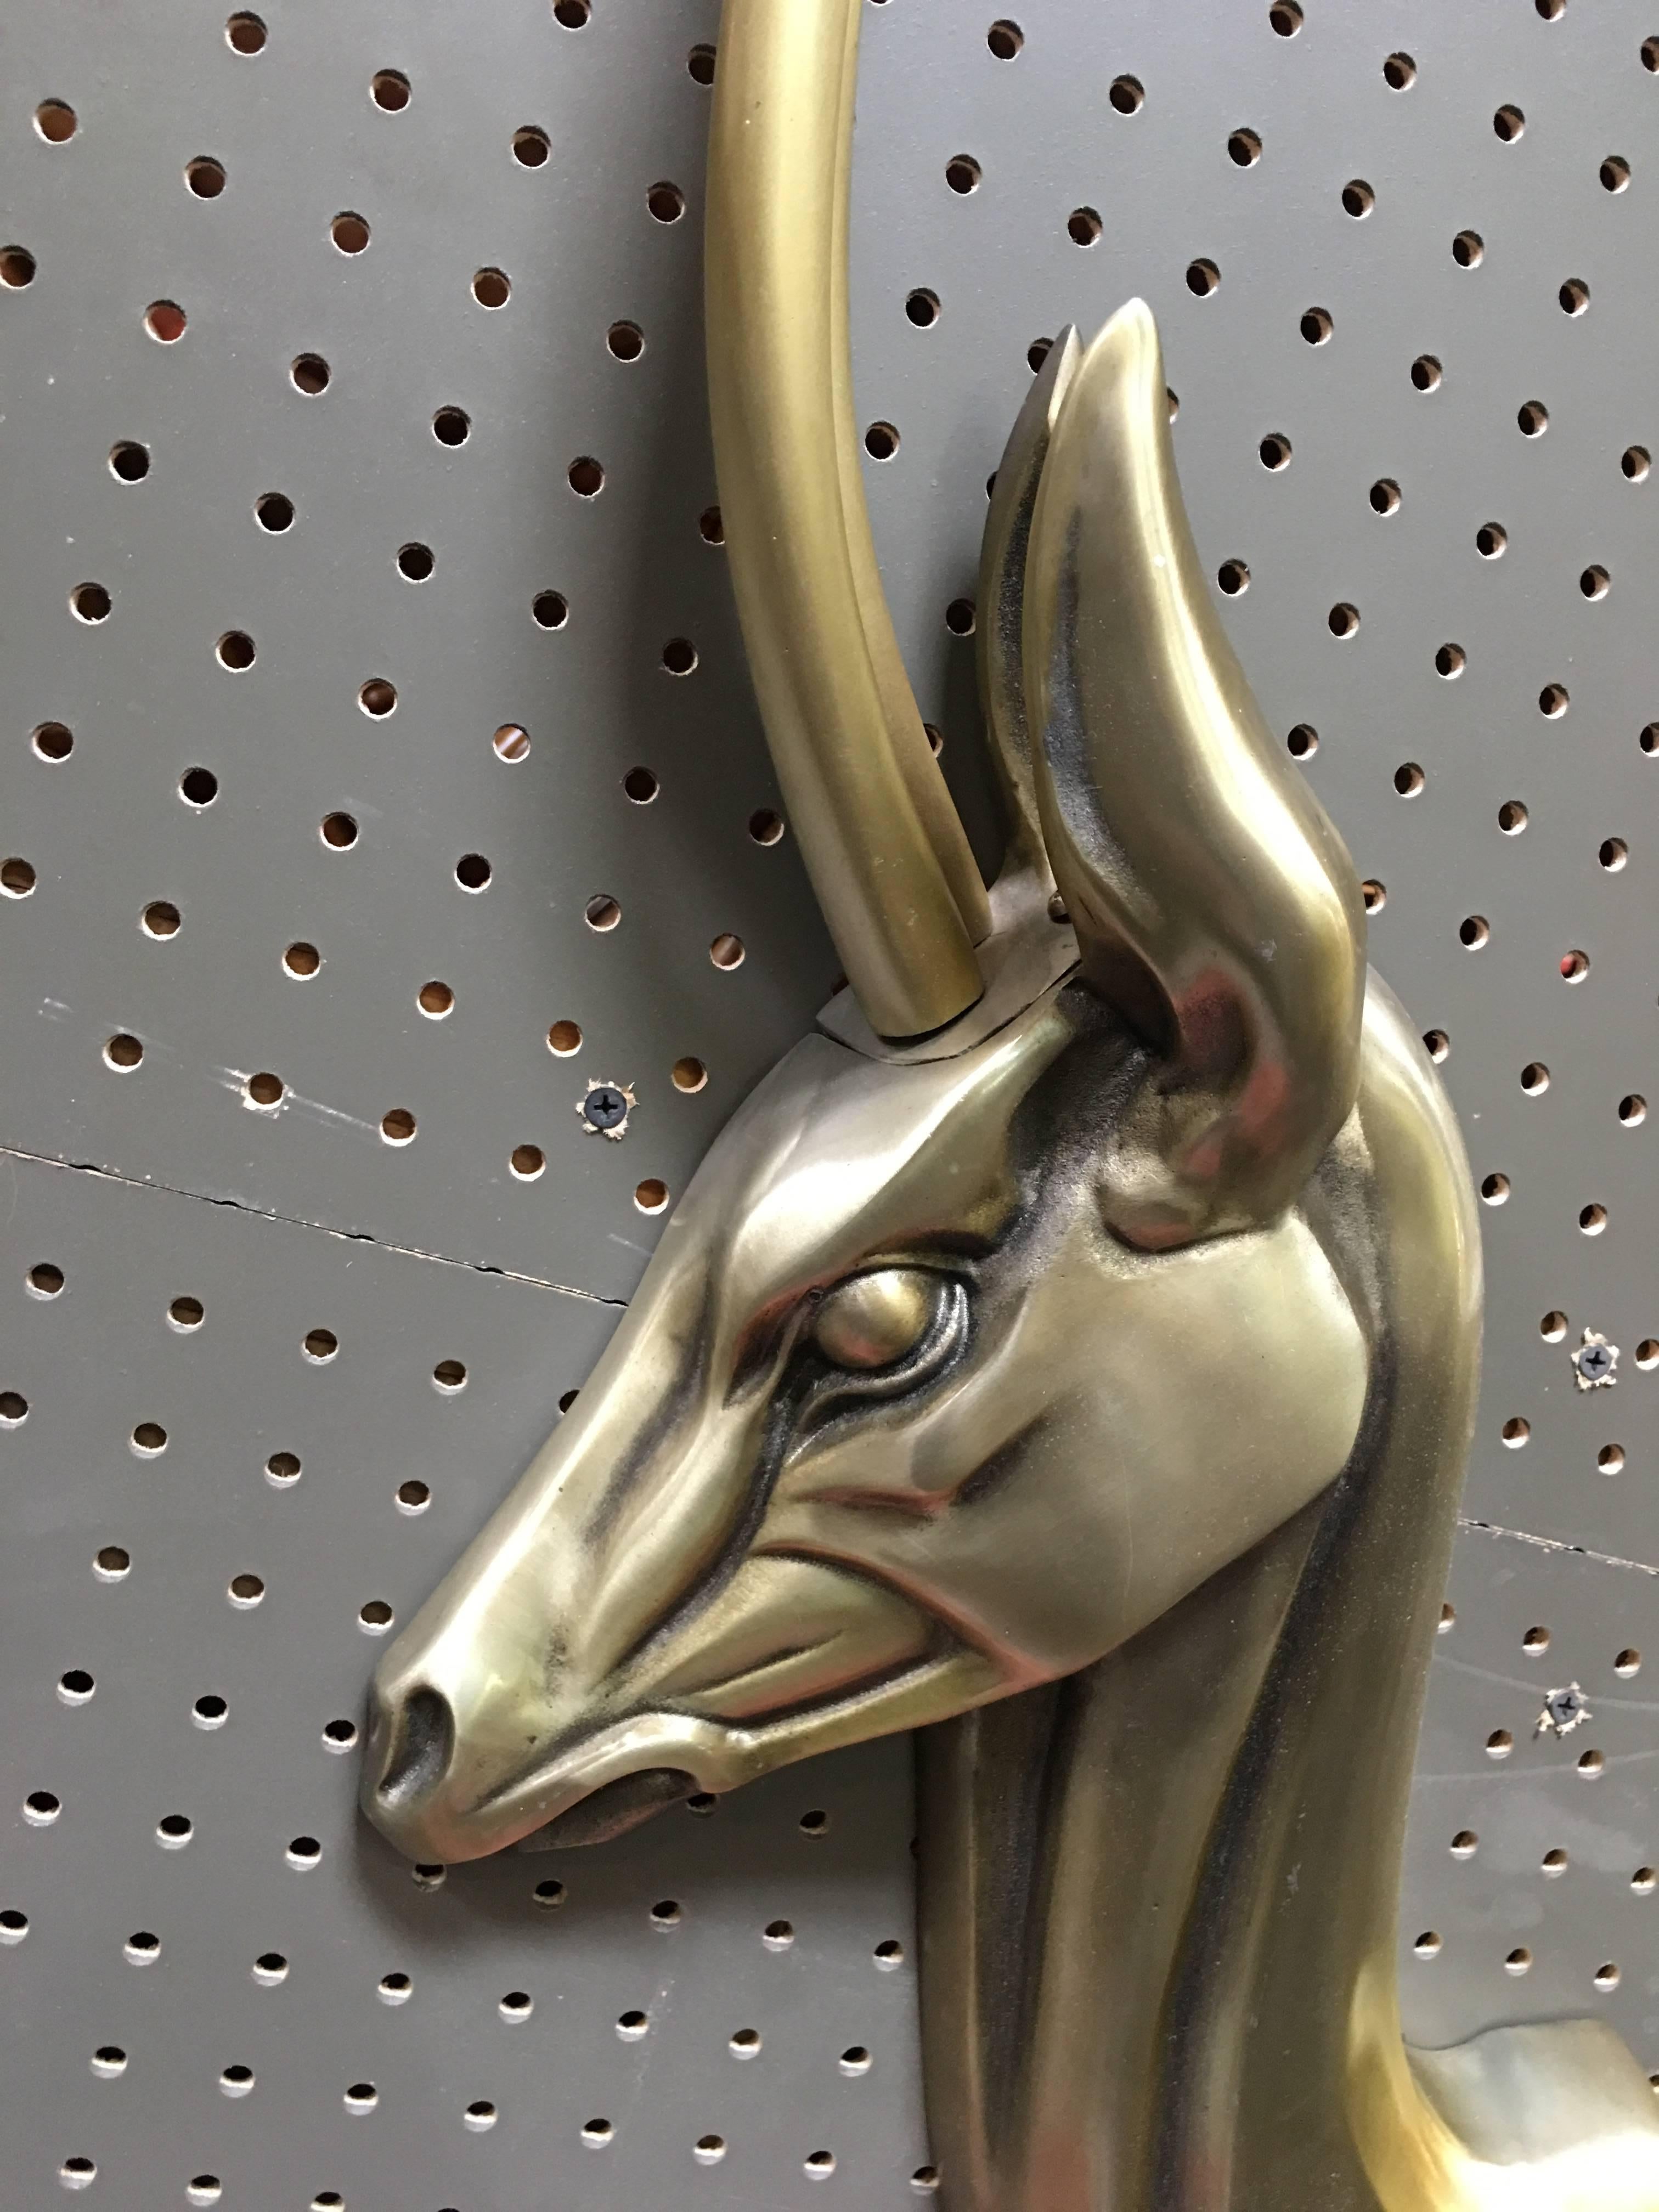 Modernist Anodized Aluminum Gazelle Wall Sculpture Pair by Pendergast In Excellent Condition For Sale In Van Nuys, CA